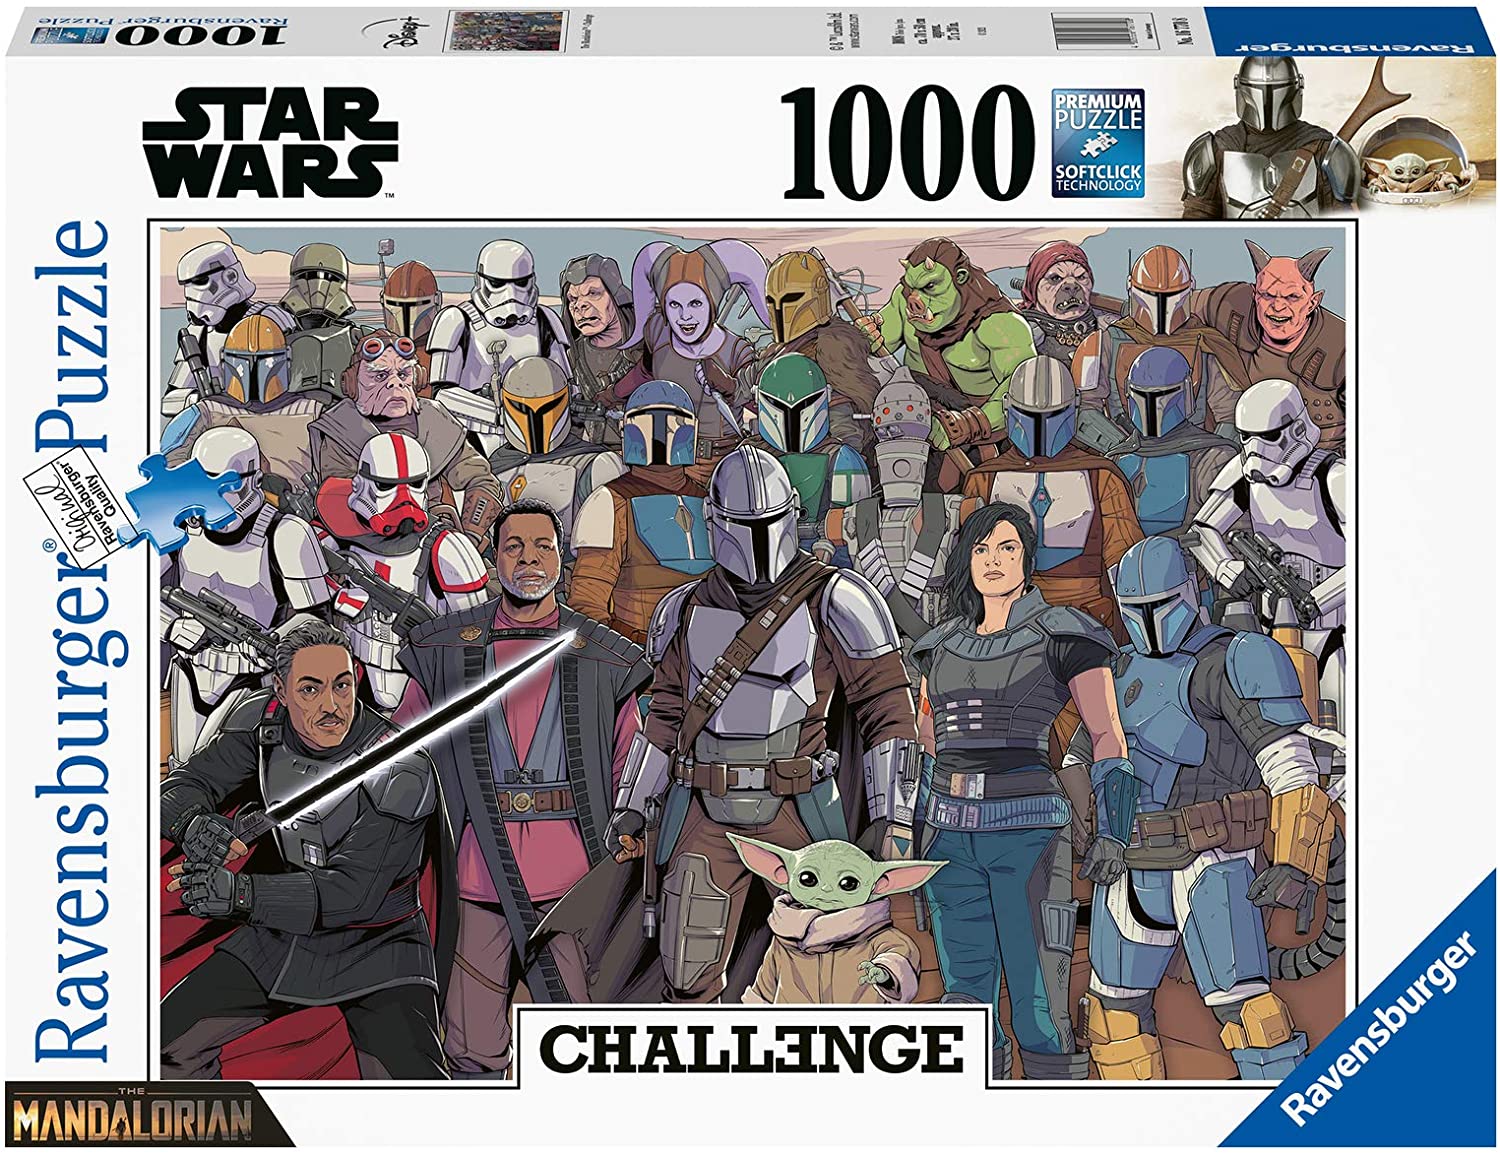 Puzzle Star Wars Mandalorian Ravensburger-16770 1000 pieces Jigsaw Puzzles  - Posters, Cinema, Advertising - Jigsaw Puzzle